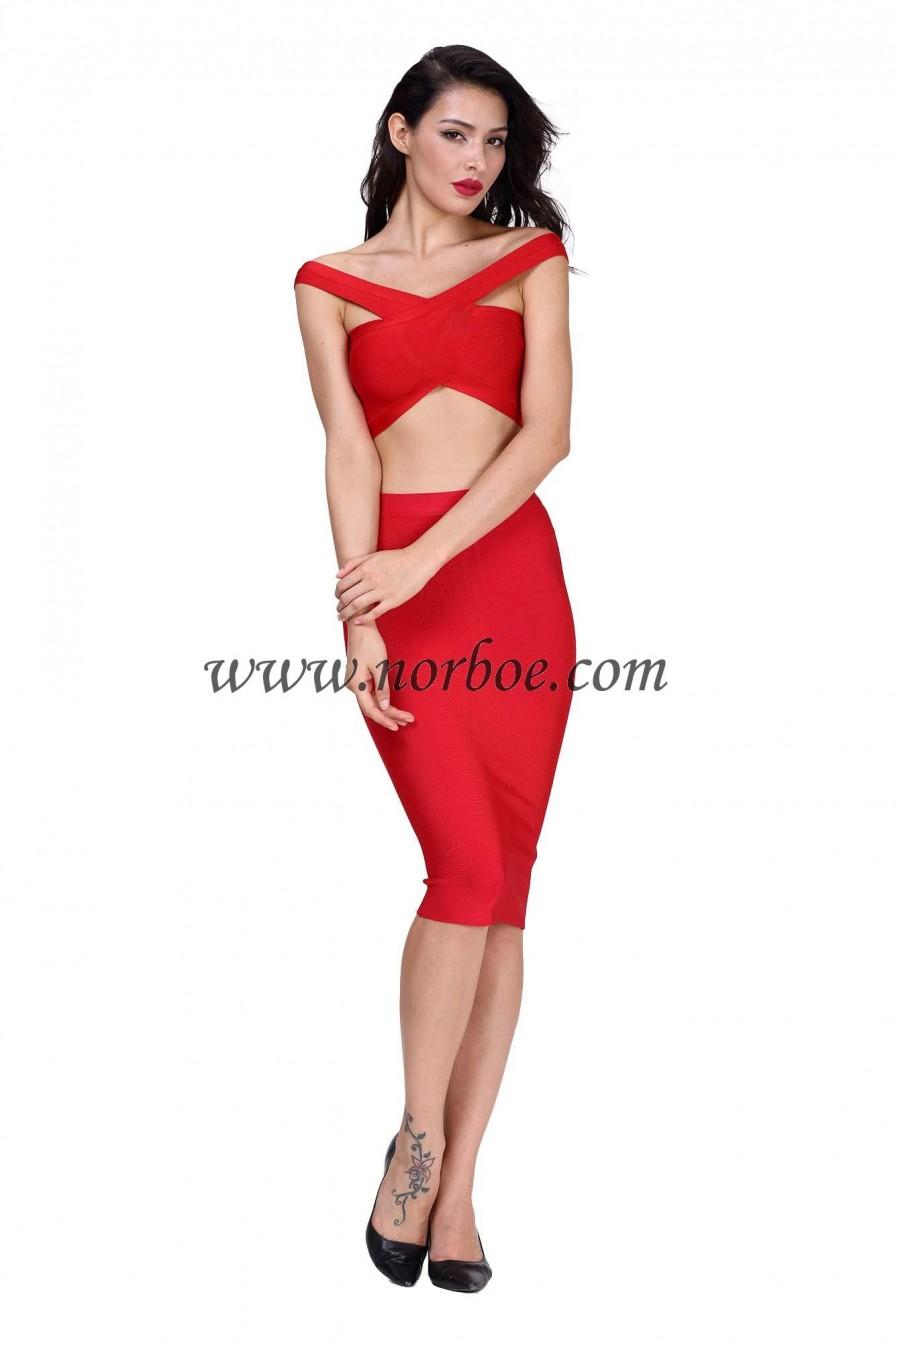 Hochzeit - Norboe The Celebrity Red Bandage Dress